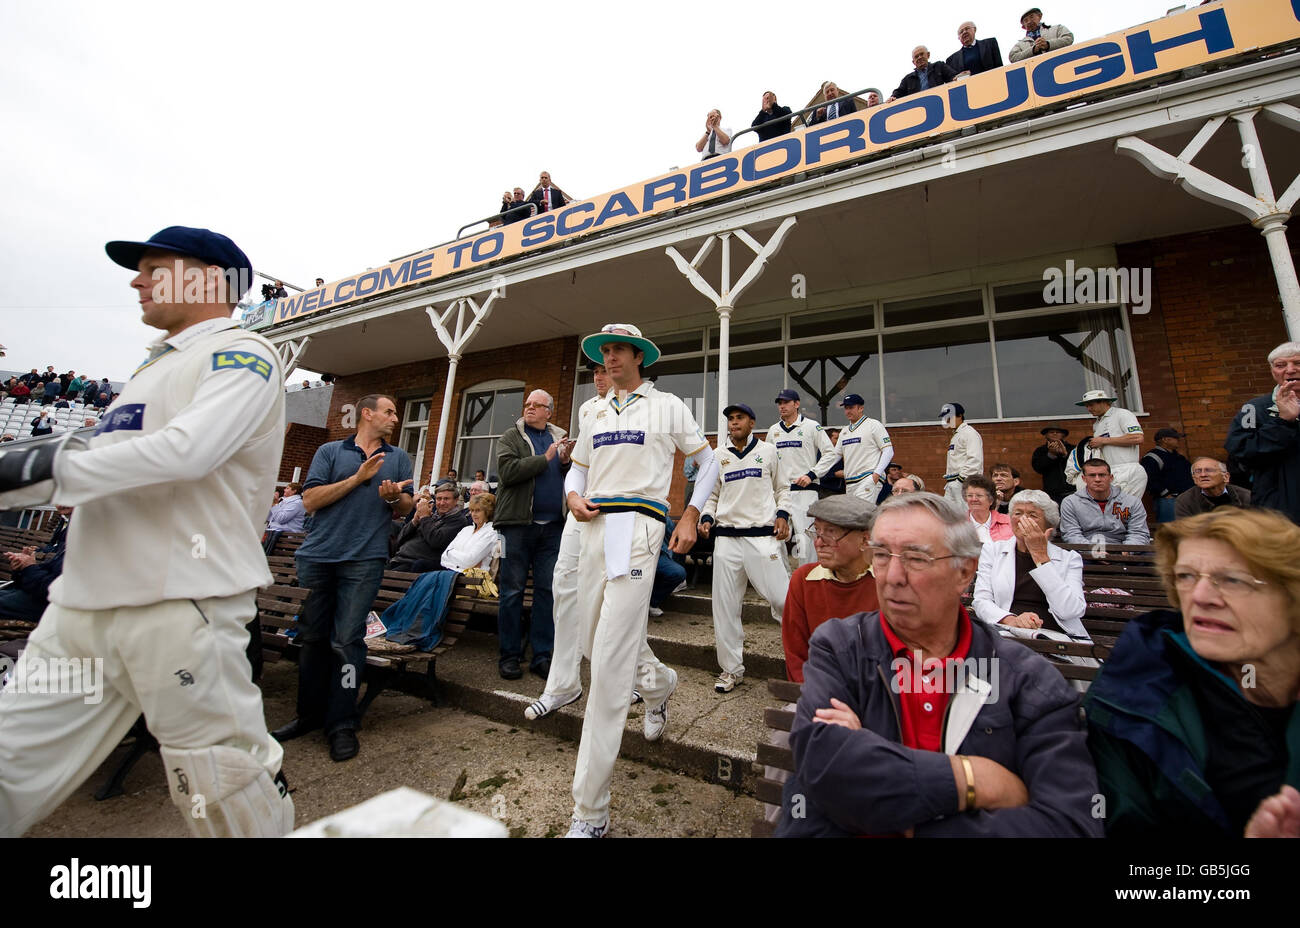 Yorkshire's Michael Vaughan walks onto the field before the LV County Championship match at North Marine Road, Scarborough. Stock Photo